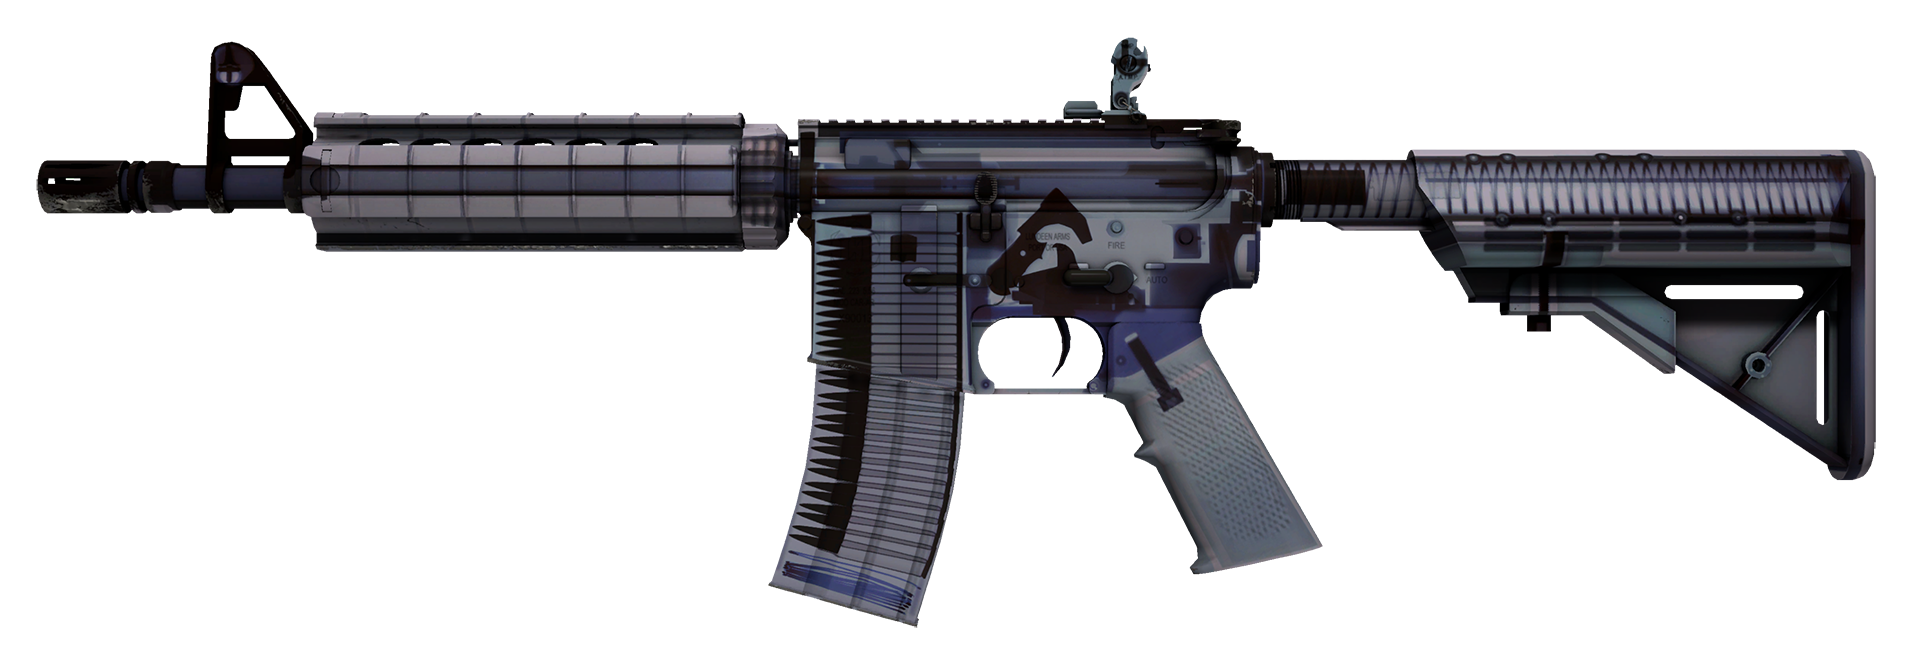 Cyber security m4a4 fn фото 104